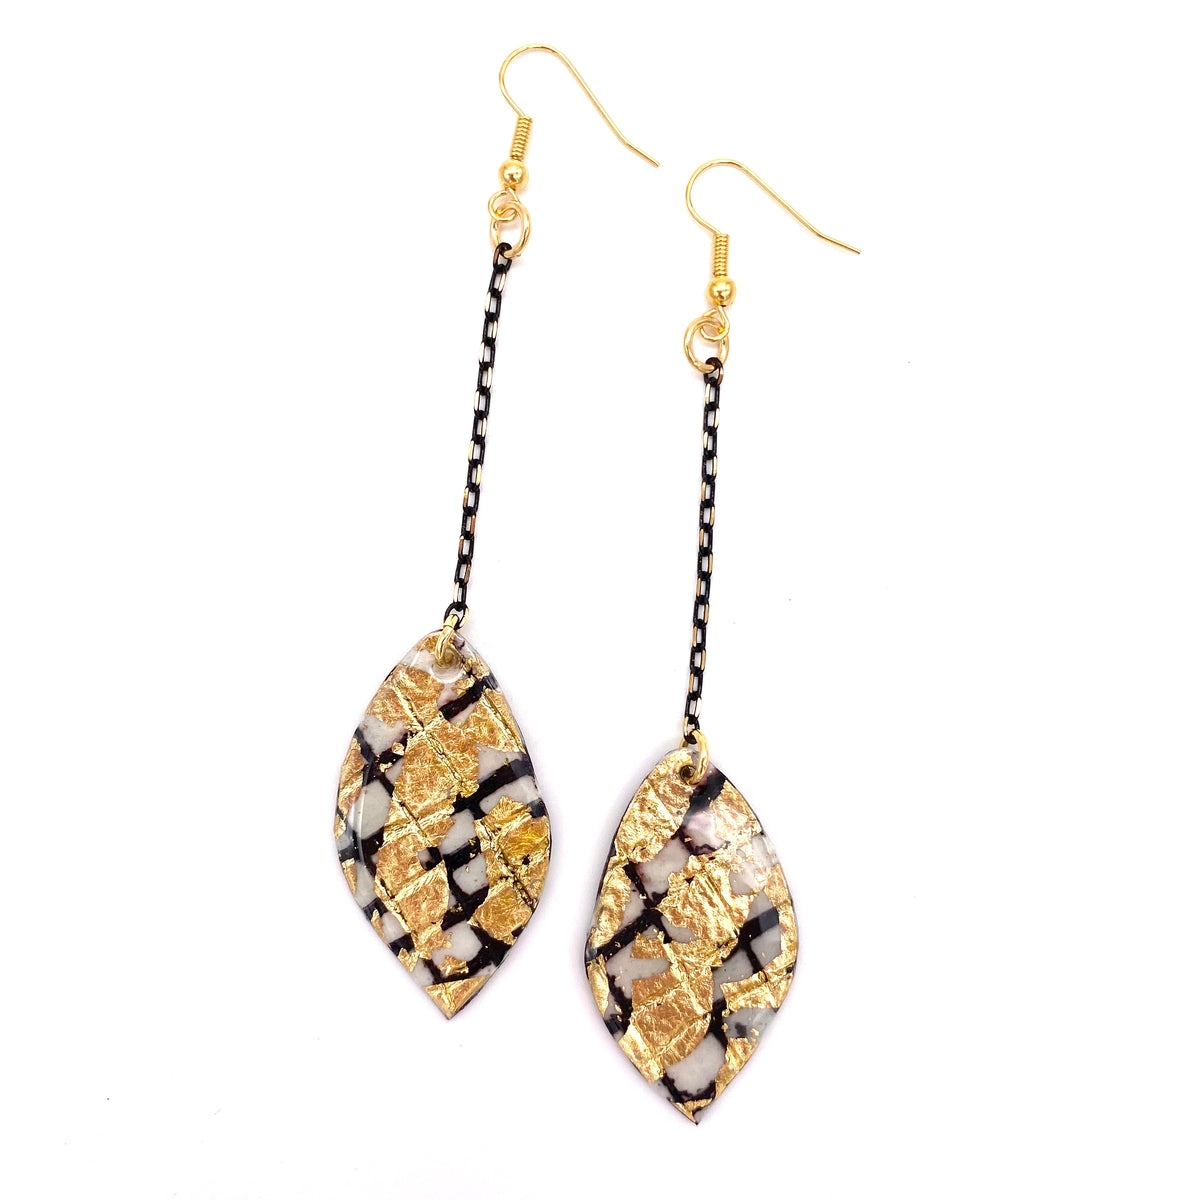 Gile abstract leaf batik textile earrings in black/gold